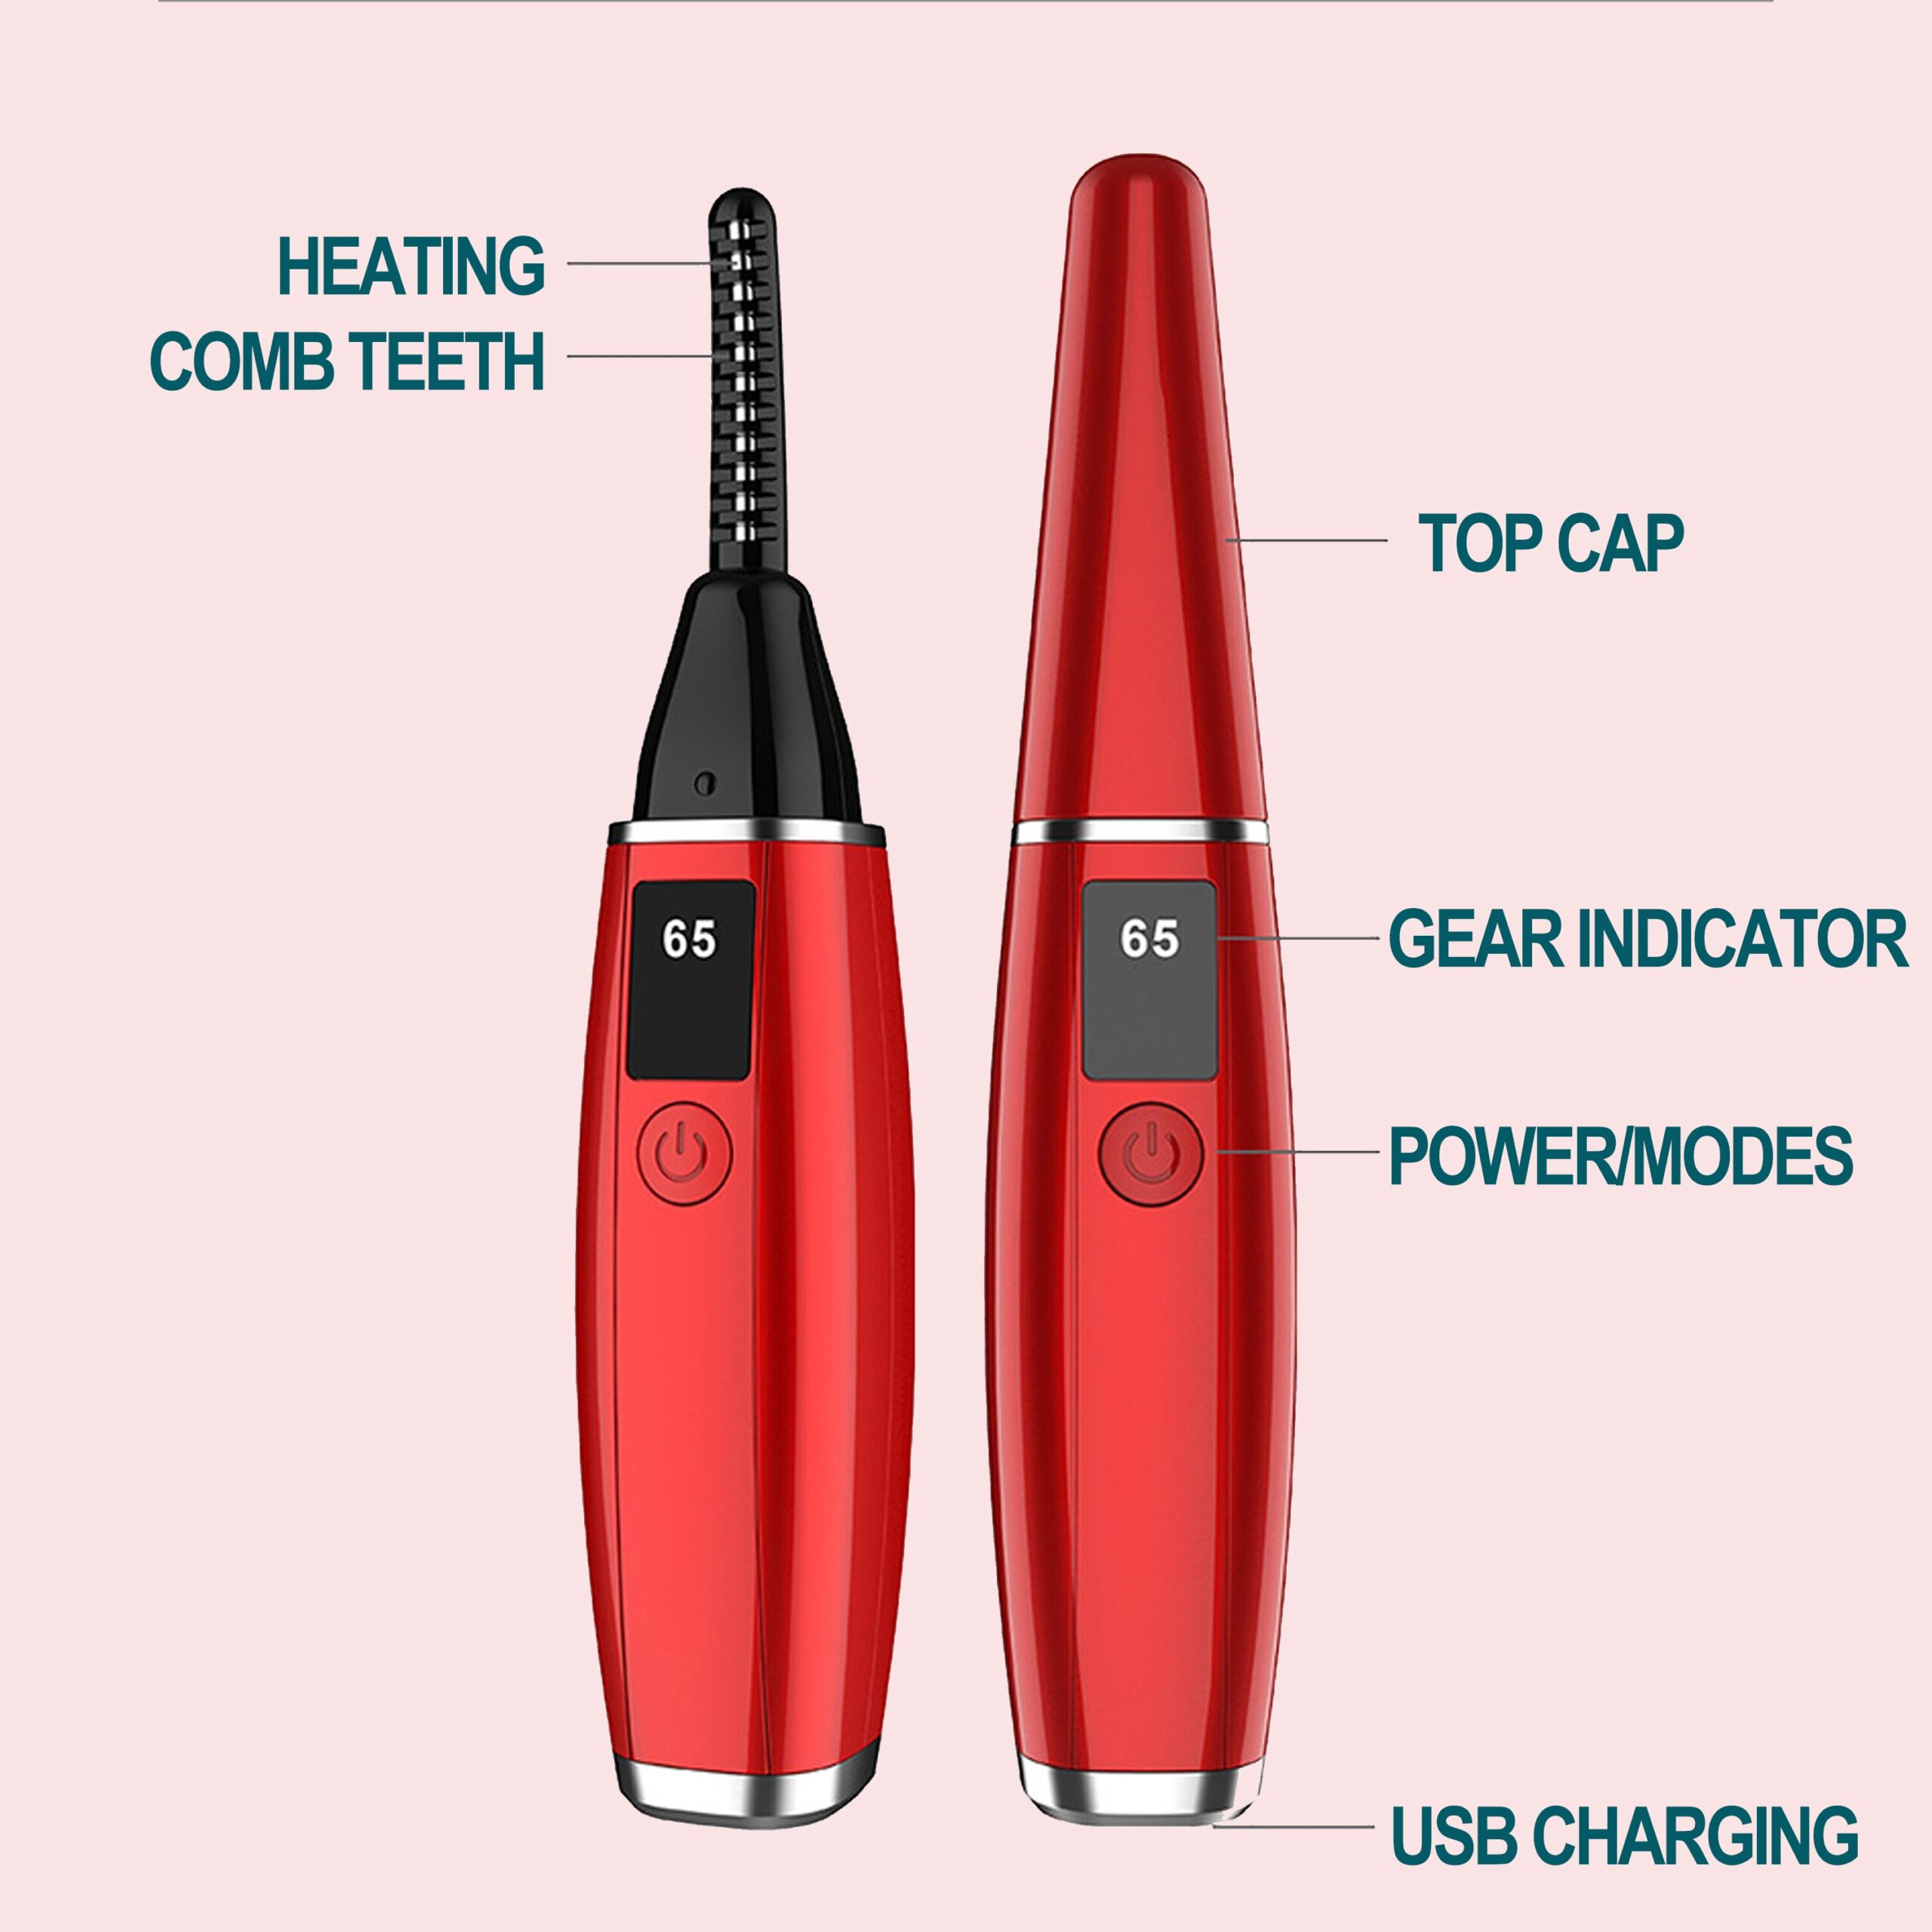 New Smart Temperature Control Electric Eyelash Curler, Safety Heated with LCD Display, USB Charge Portable Long Lasting